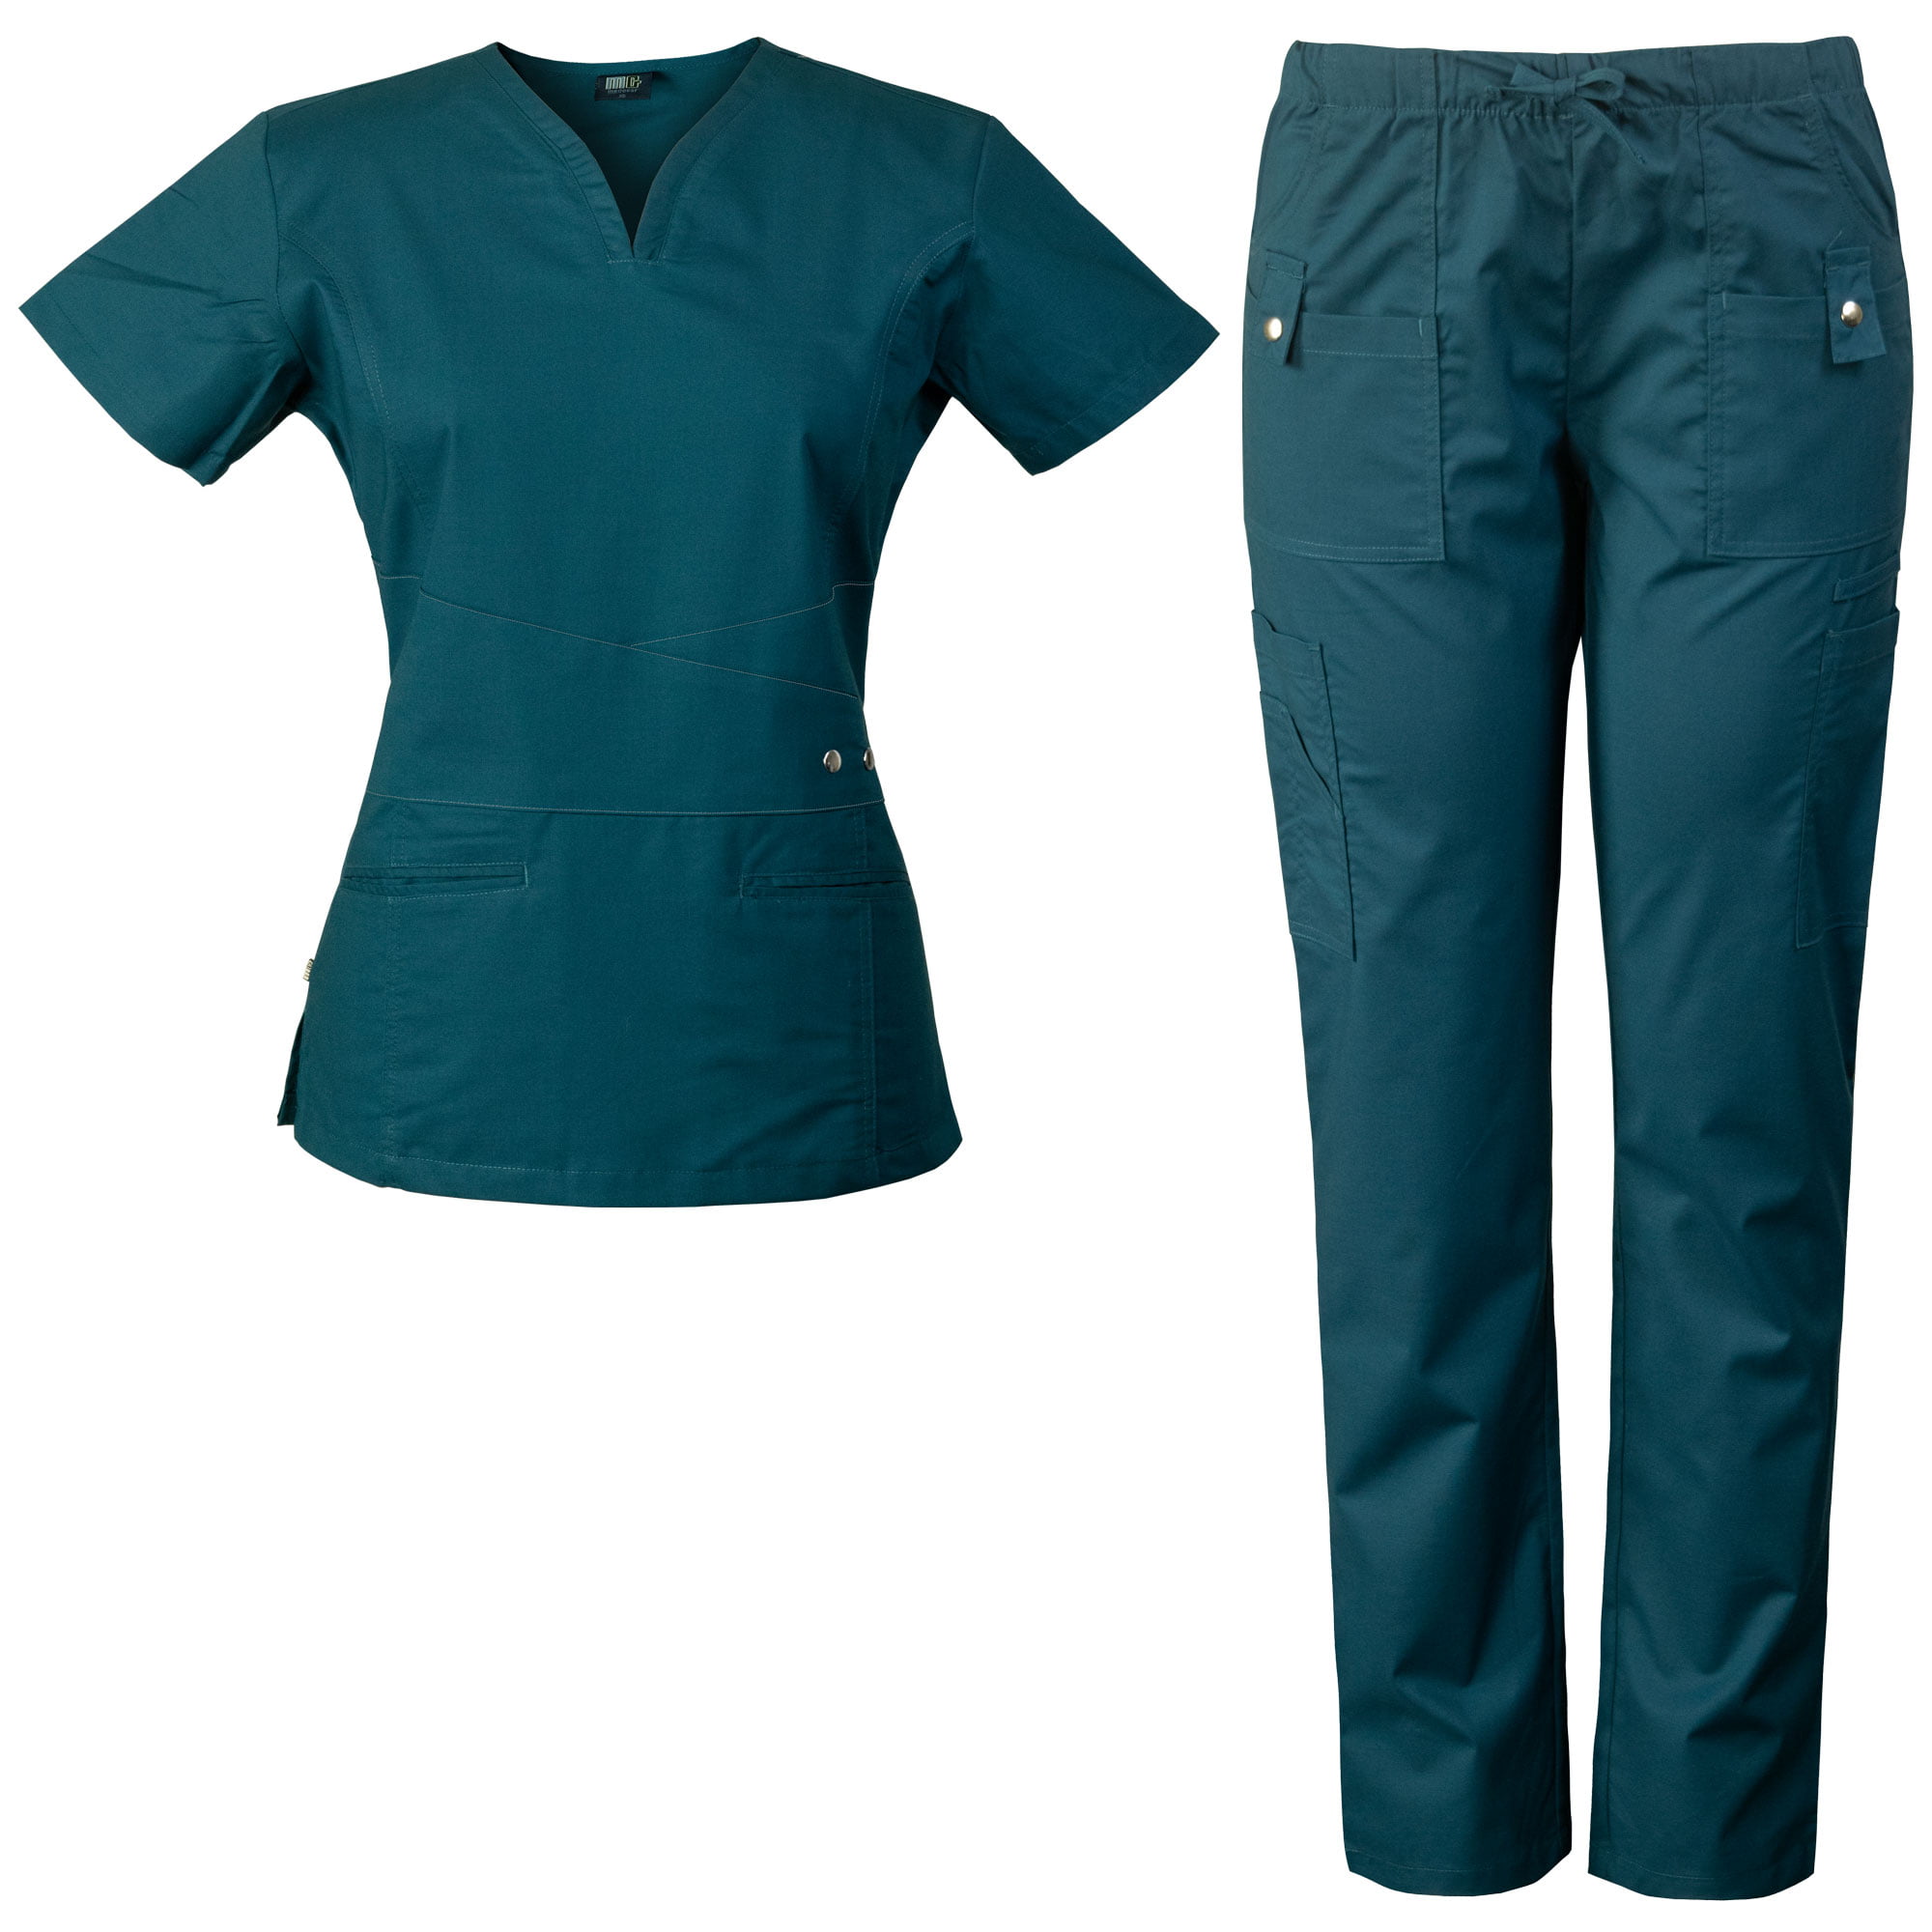 Medgear - Women's Scrubs Set with Curved V-neck and Flattering Delicate ...